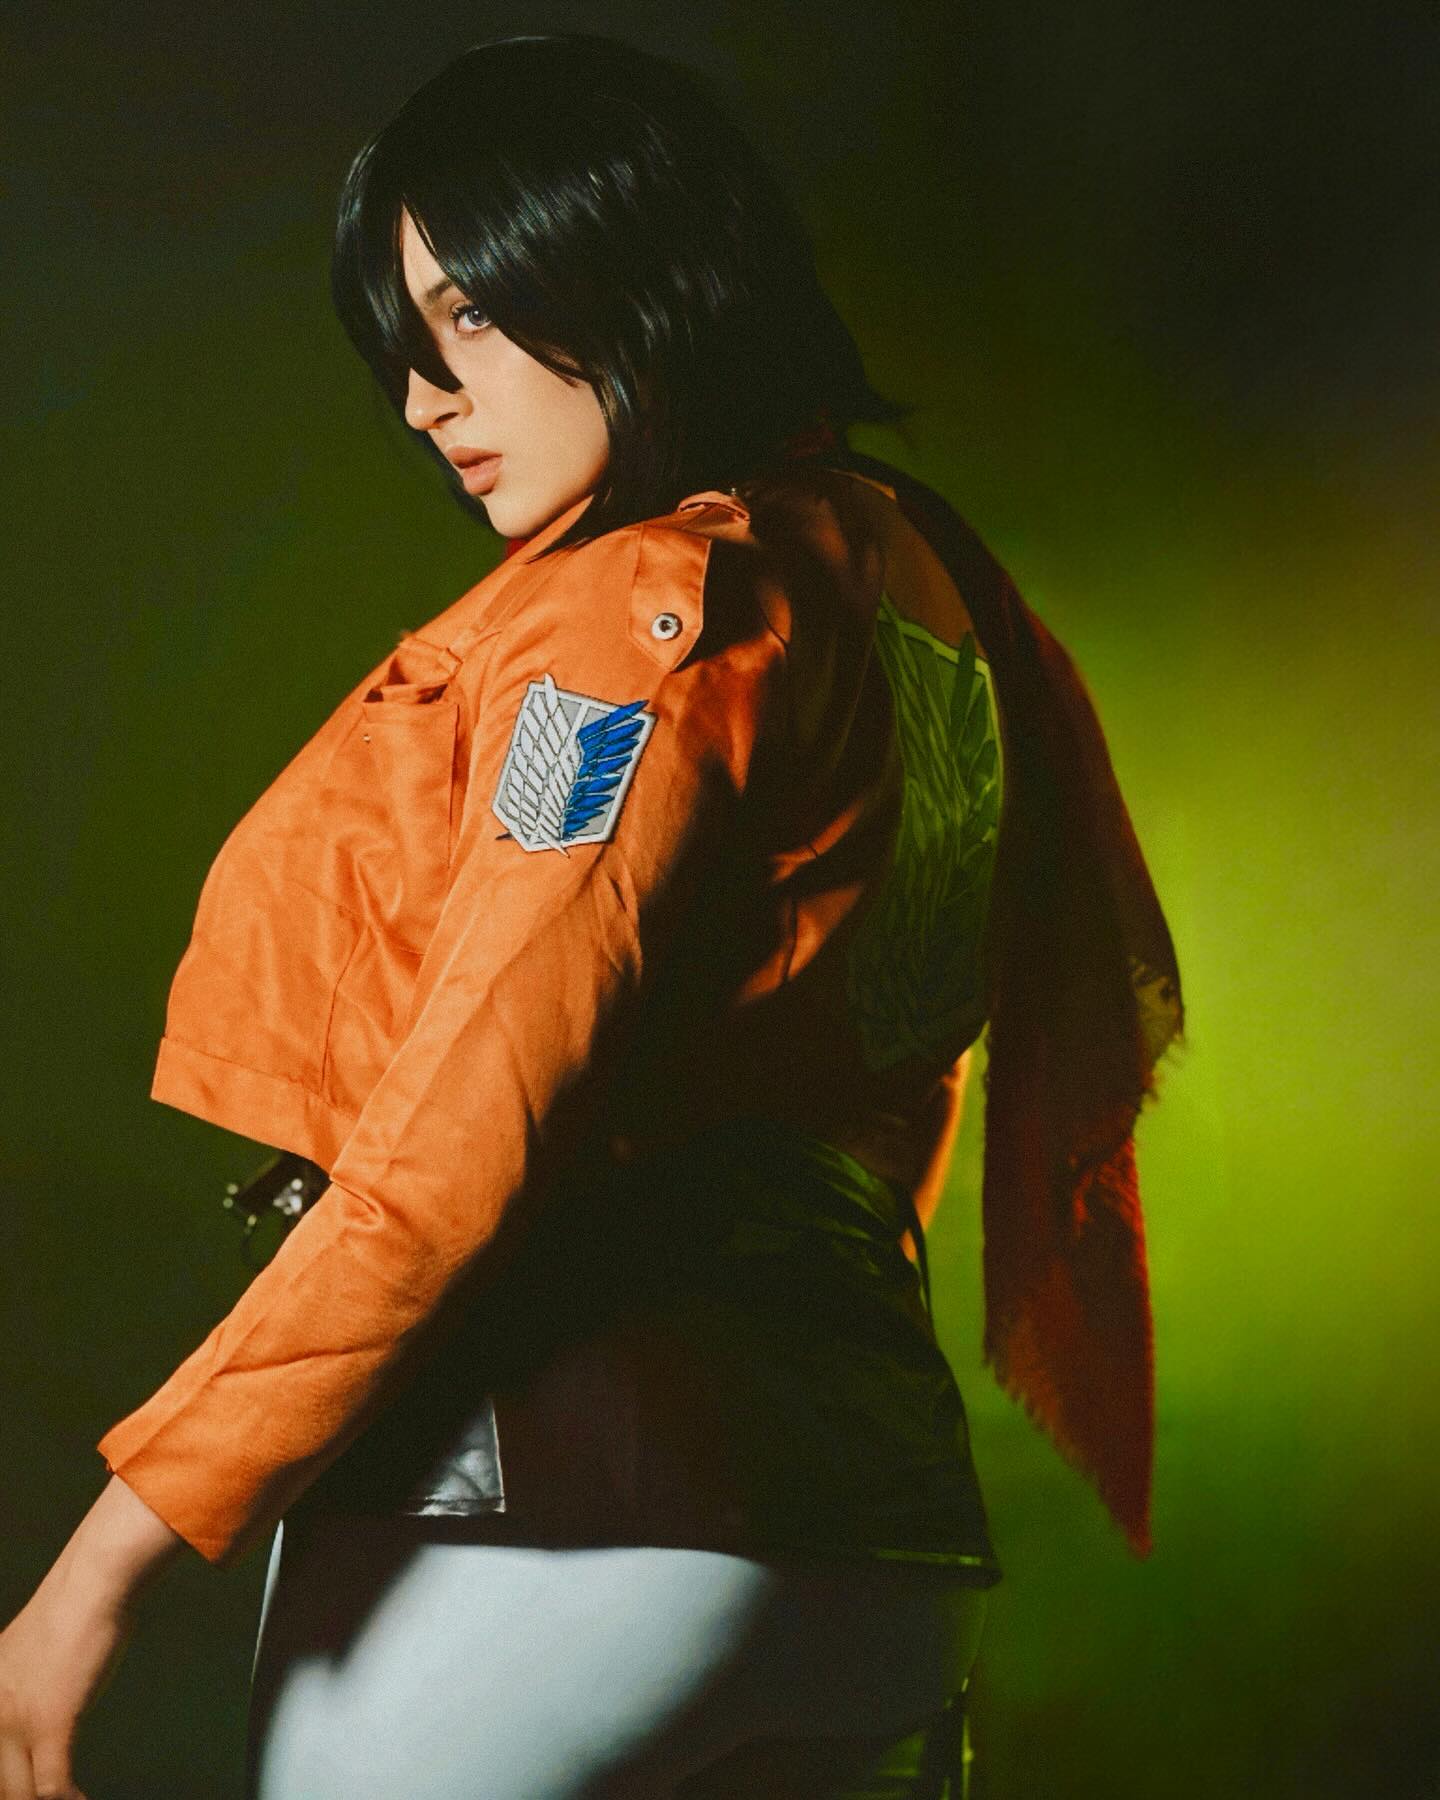 I said “Eren” in Mikasa’s voice entirely too much taking these photos lmao
…
Character: Mikasa (Attack on Titan)
….
#cosplay #cosplayer #cosplaygirl #attackontitan #aot #mikasa #mikasacosplay